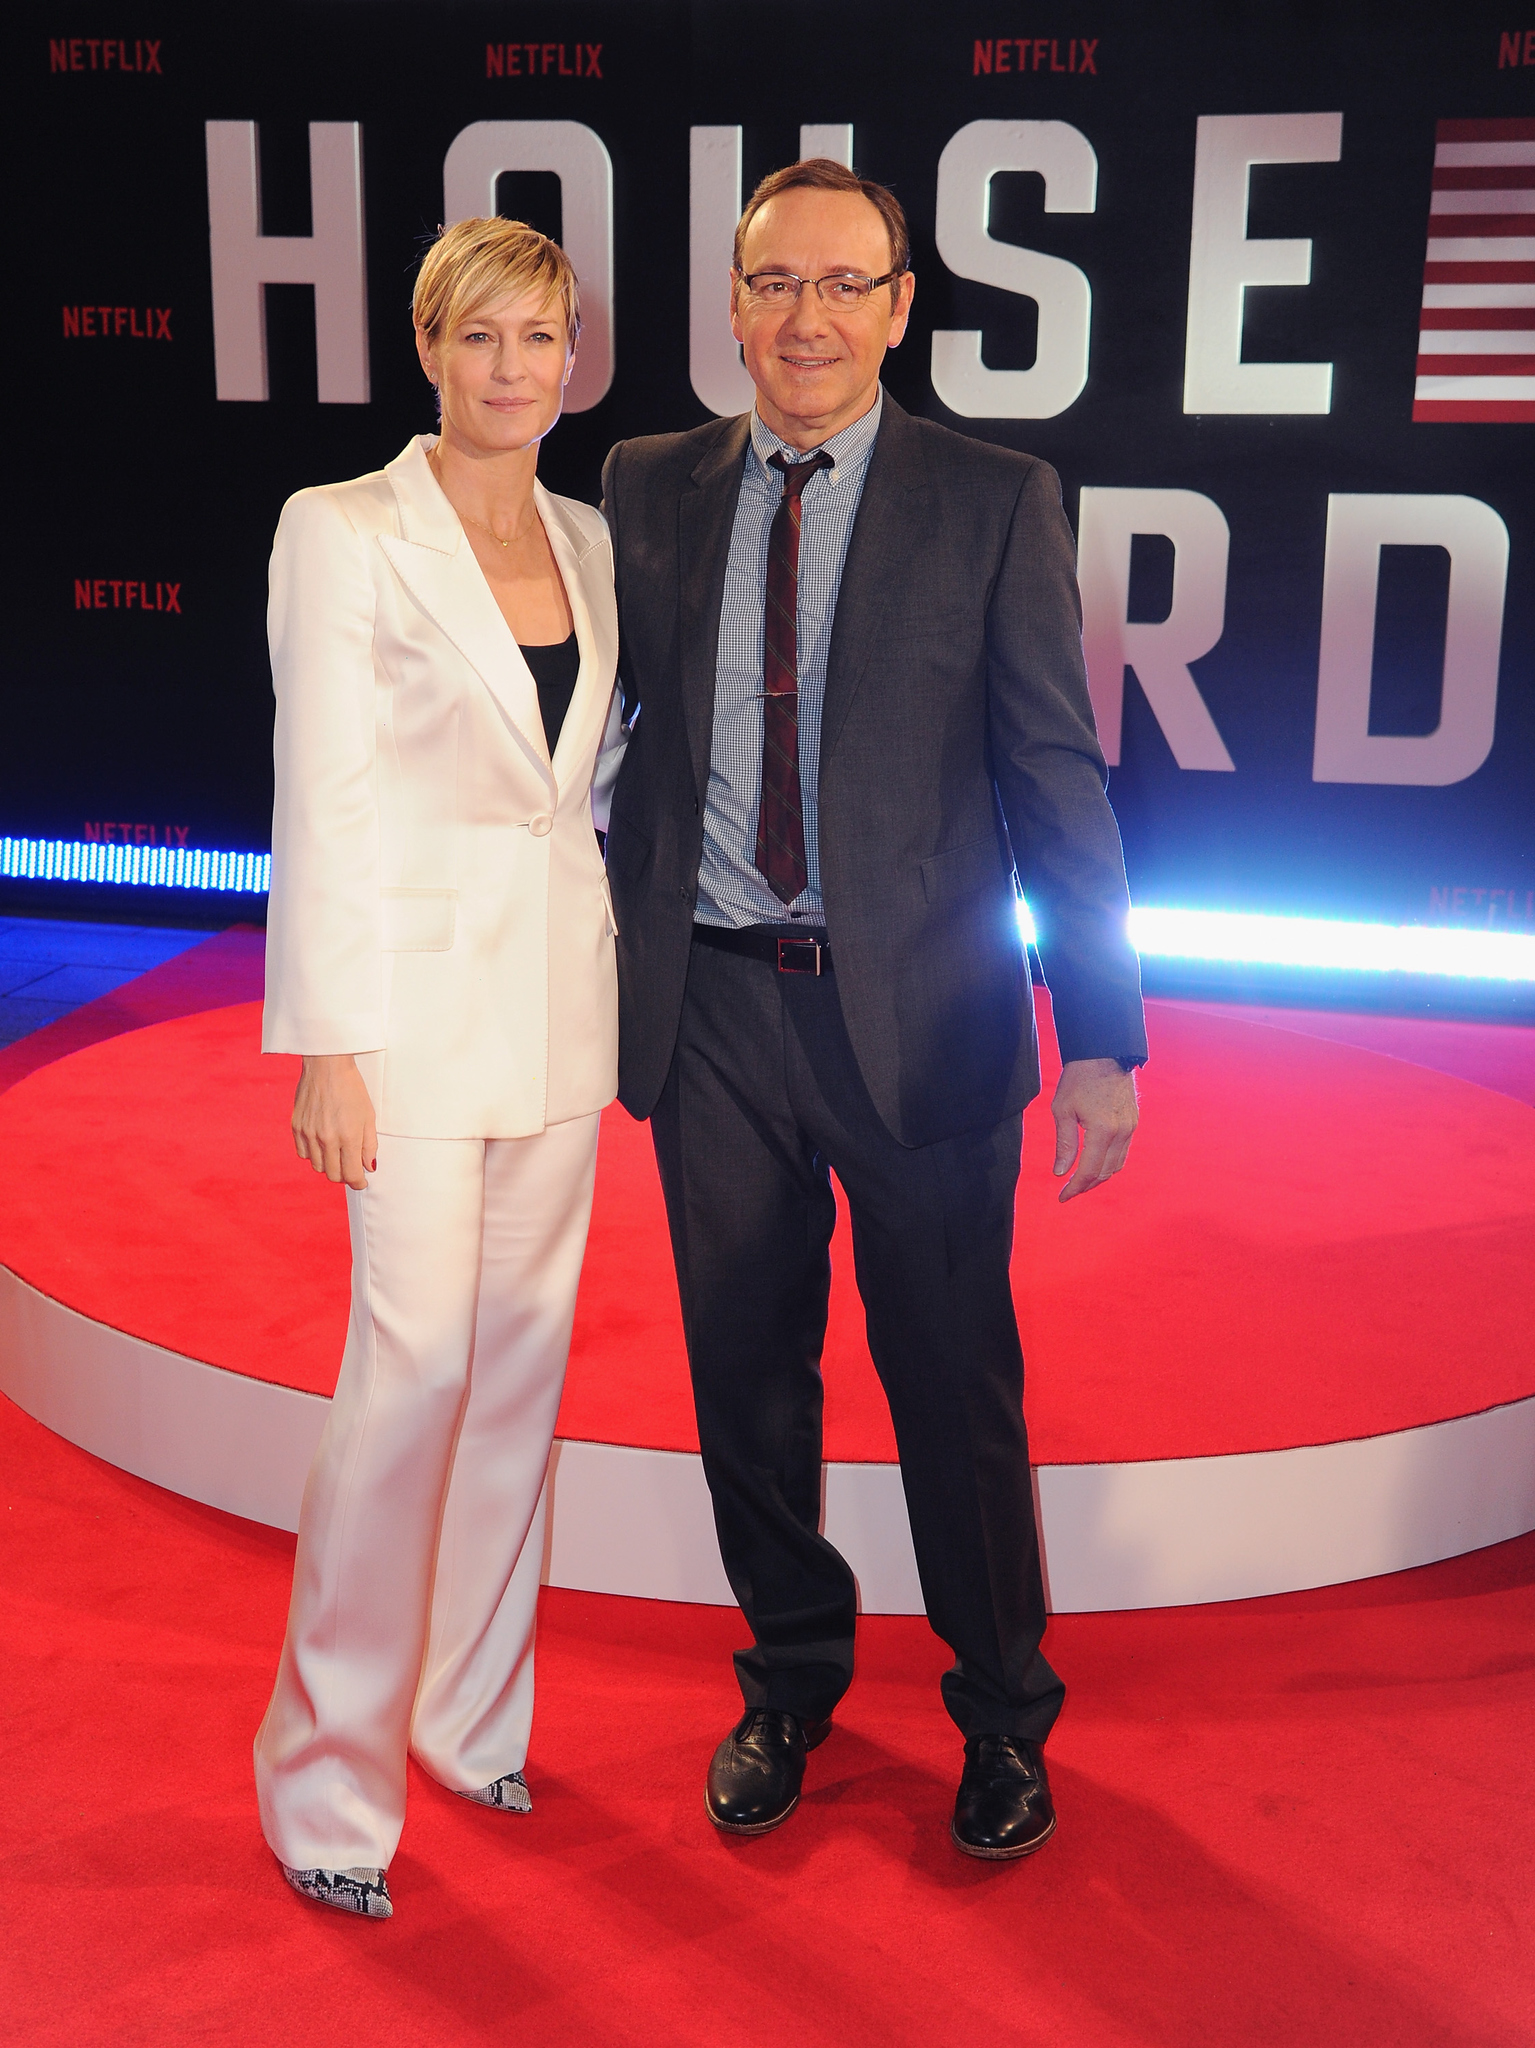 Kevin Spacey and Robin Wright at event of Kortu Namelis (2013)